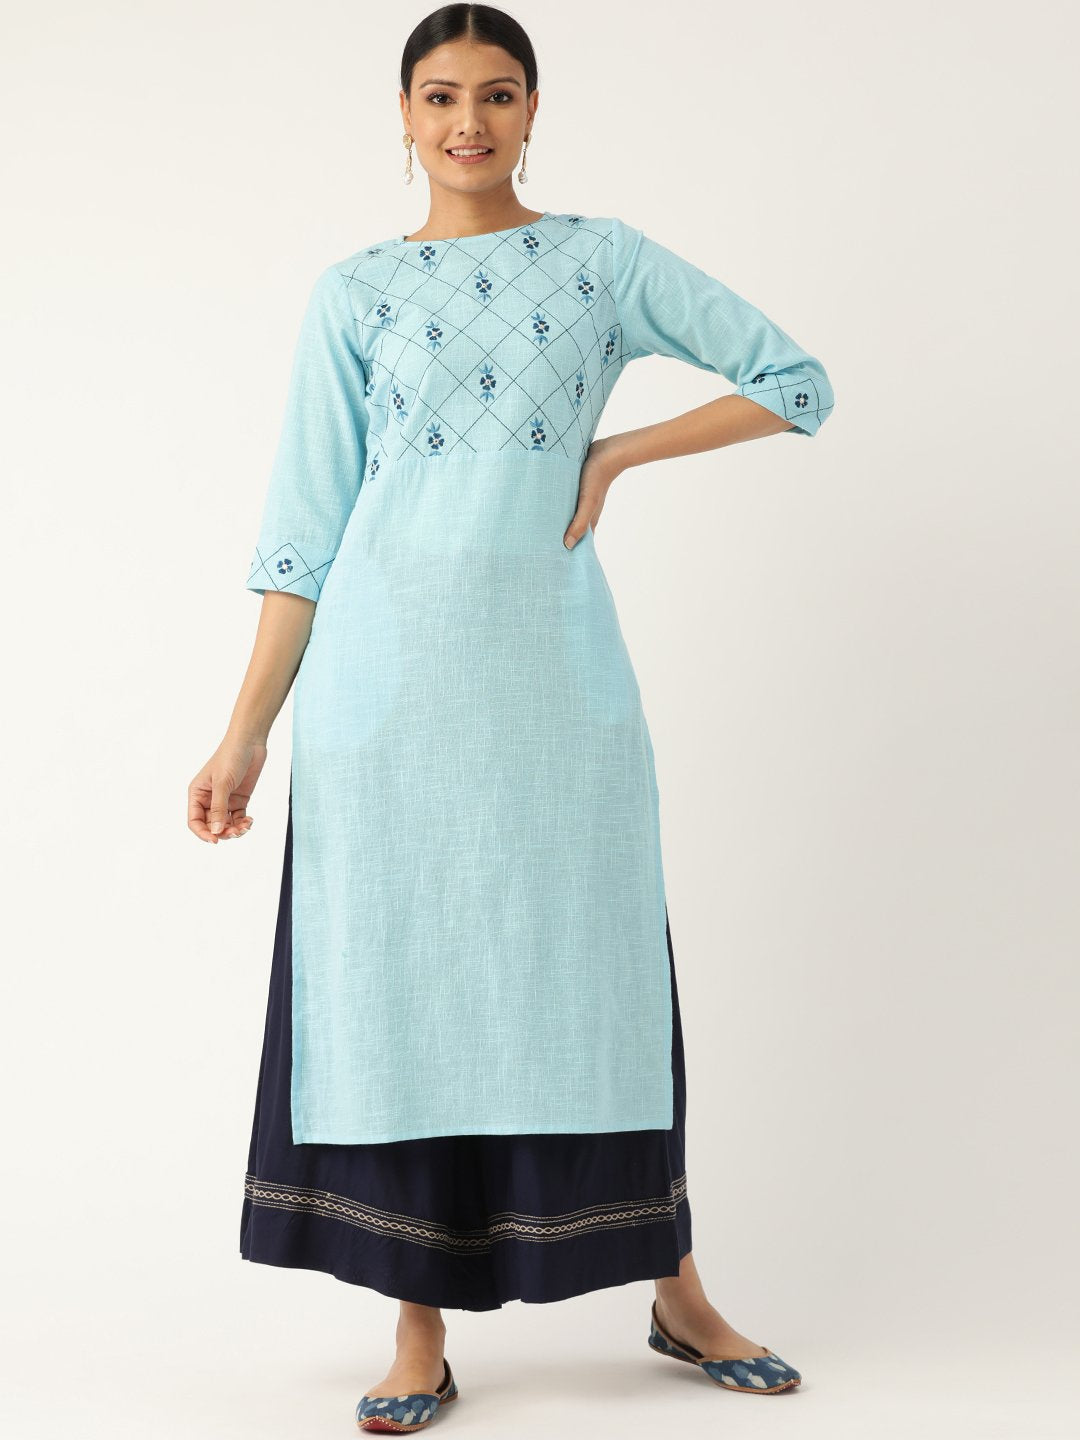 Women's Blue Calf Length Three-Quarter Sleeves Straight Solid Embroidered Cotton Kurta - Nayo Clothing